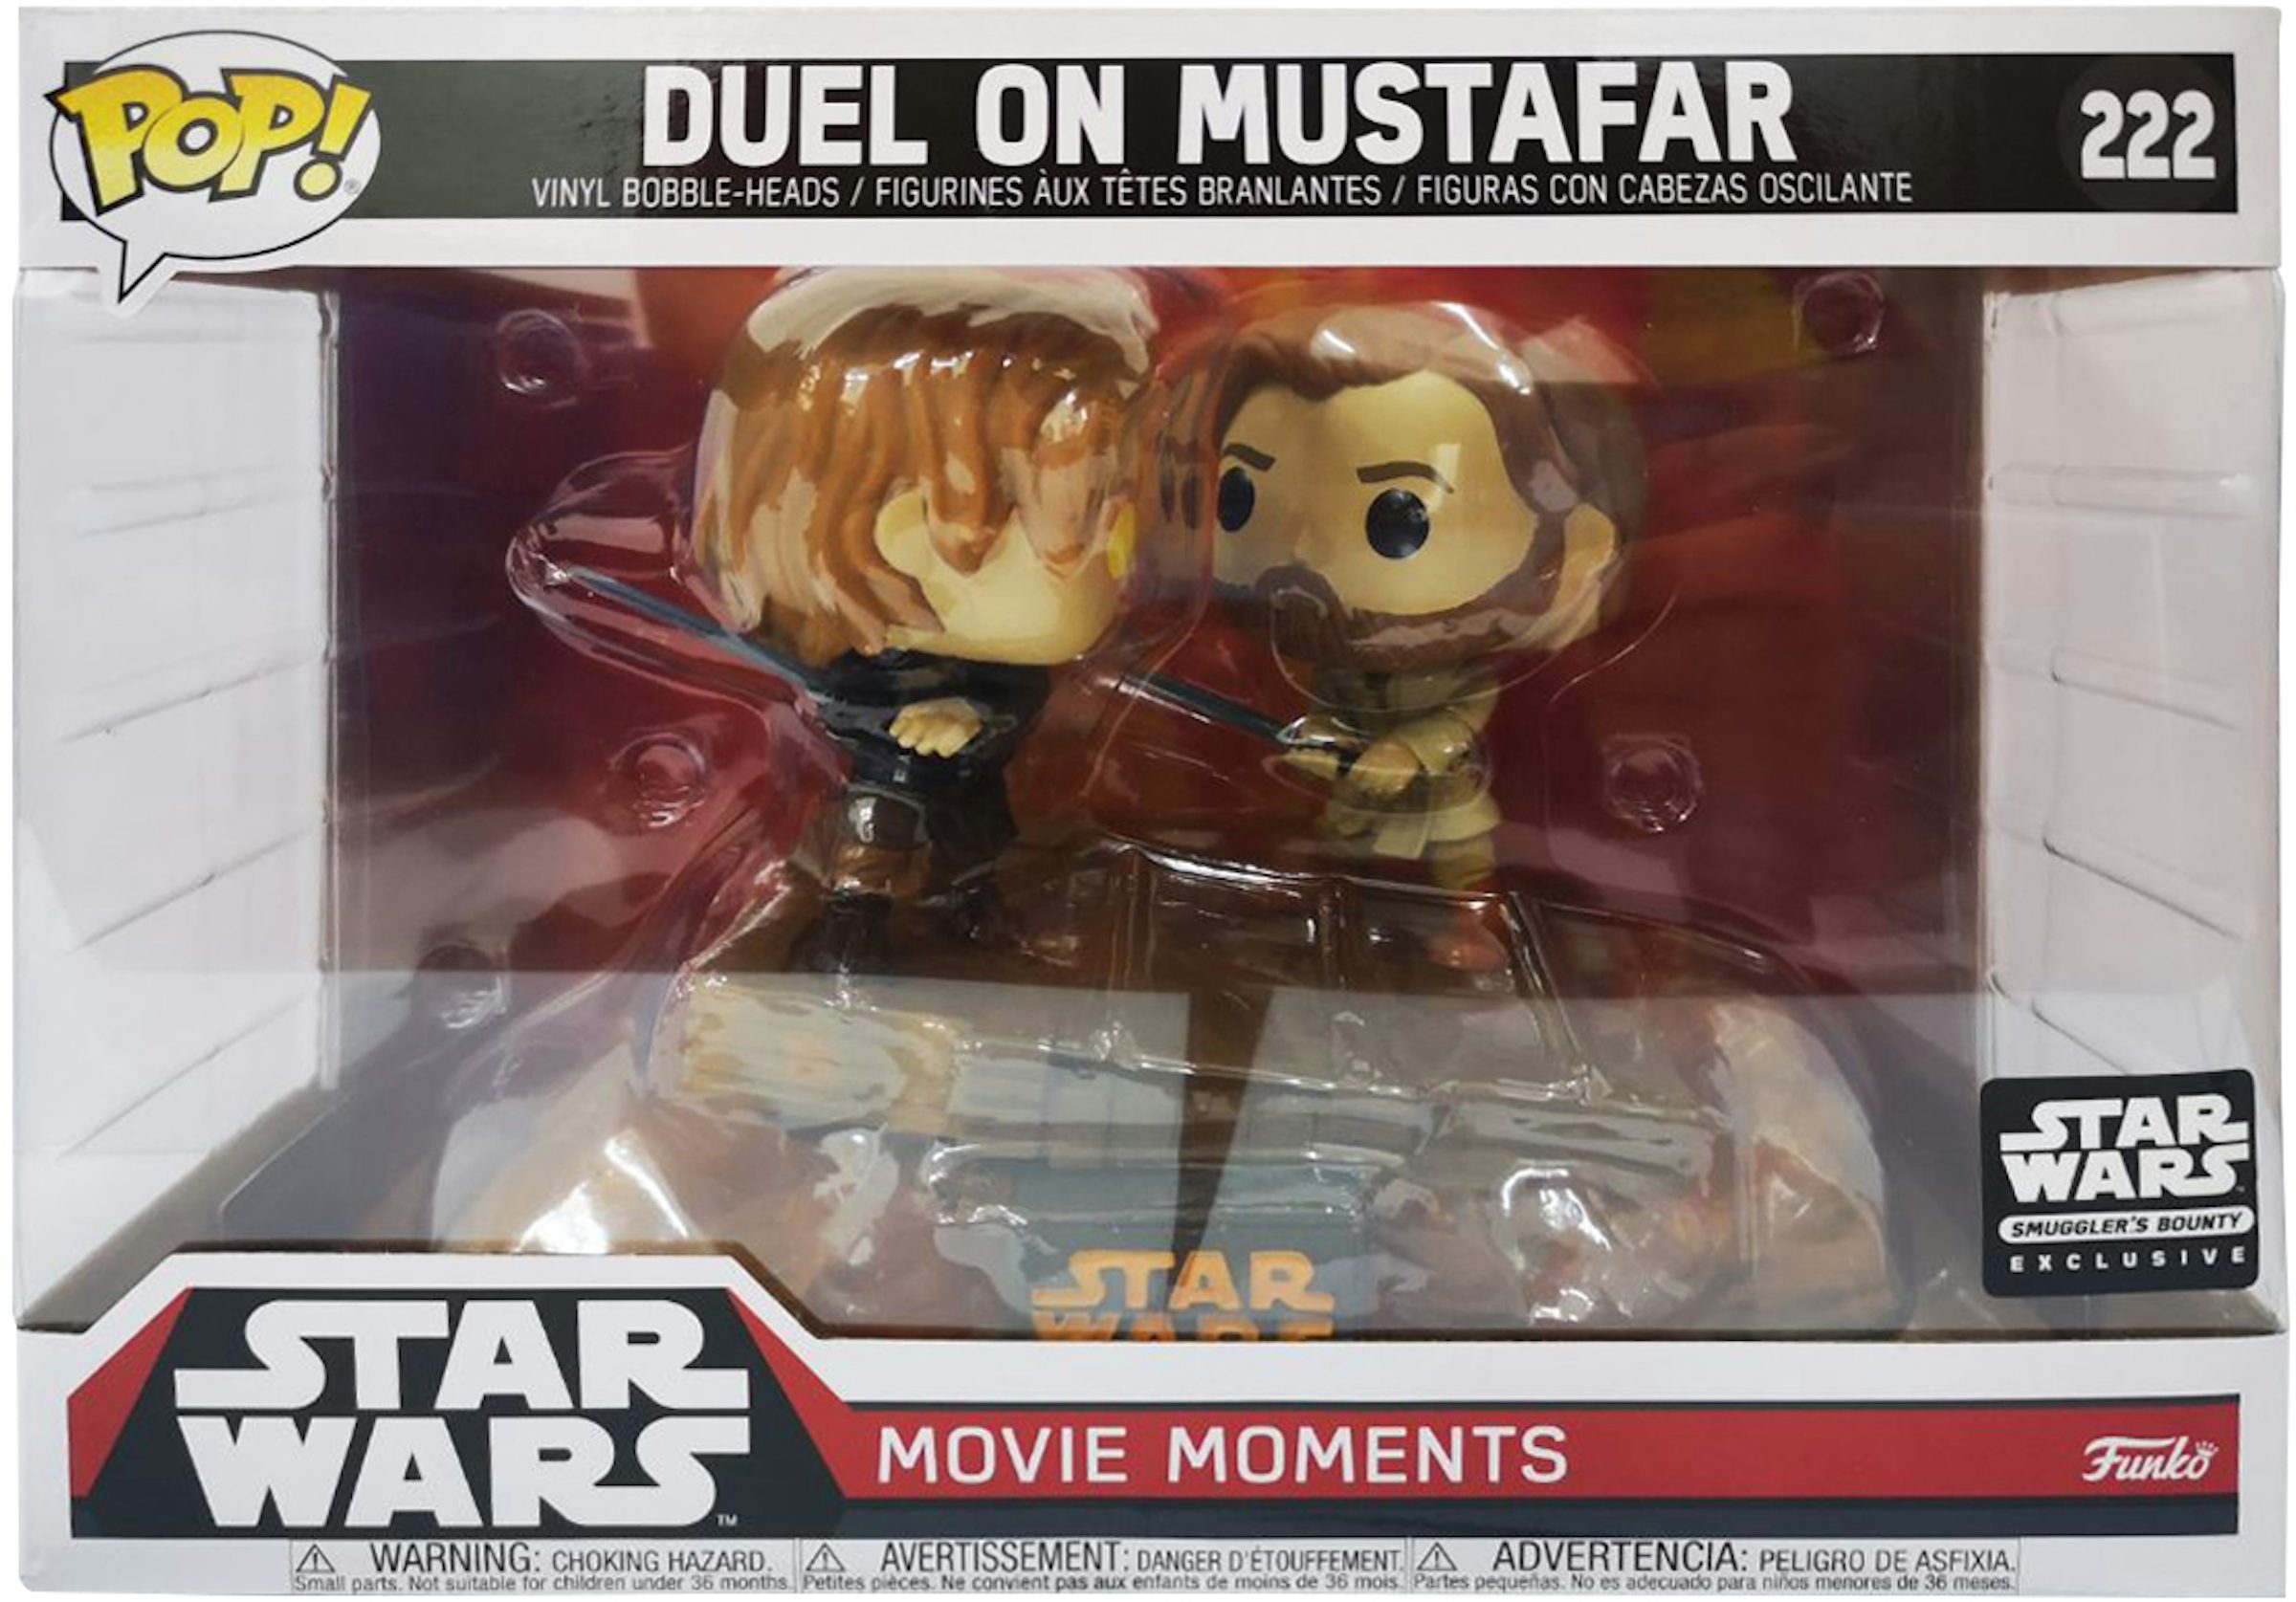 https://images.stockx.com/images/Funko-Pop-Star-Wars-Duel-On-Mustafar-Smugglers-Bounty-Exclusive-Movie-Moments-Figure-222.jpg?fit=fill&bg=FFFFFF&w=1200&h=857&fm=jpg&auto=compress&dpr=2&trim=color&updated_at=1615420667&q=60